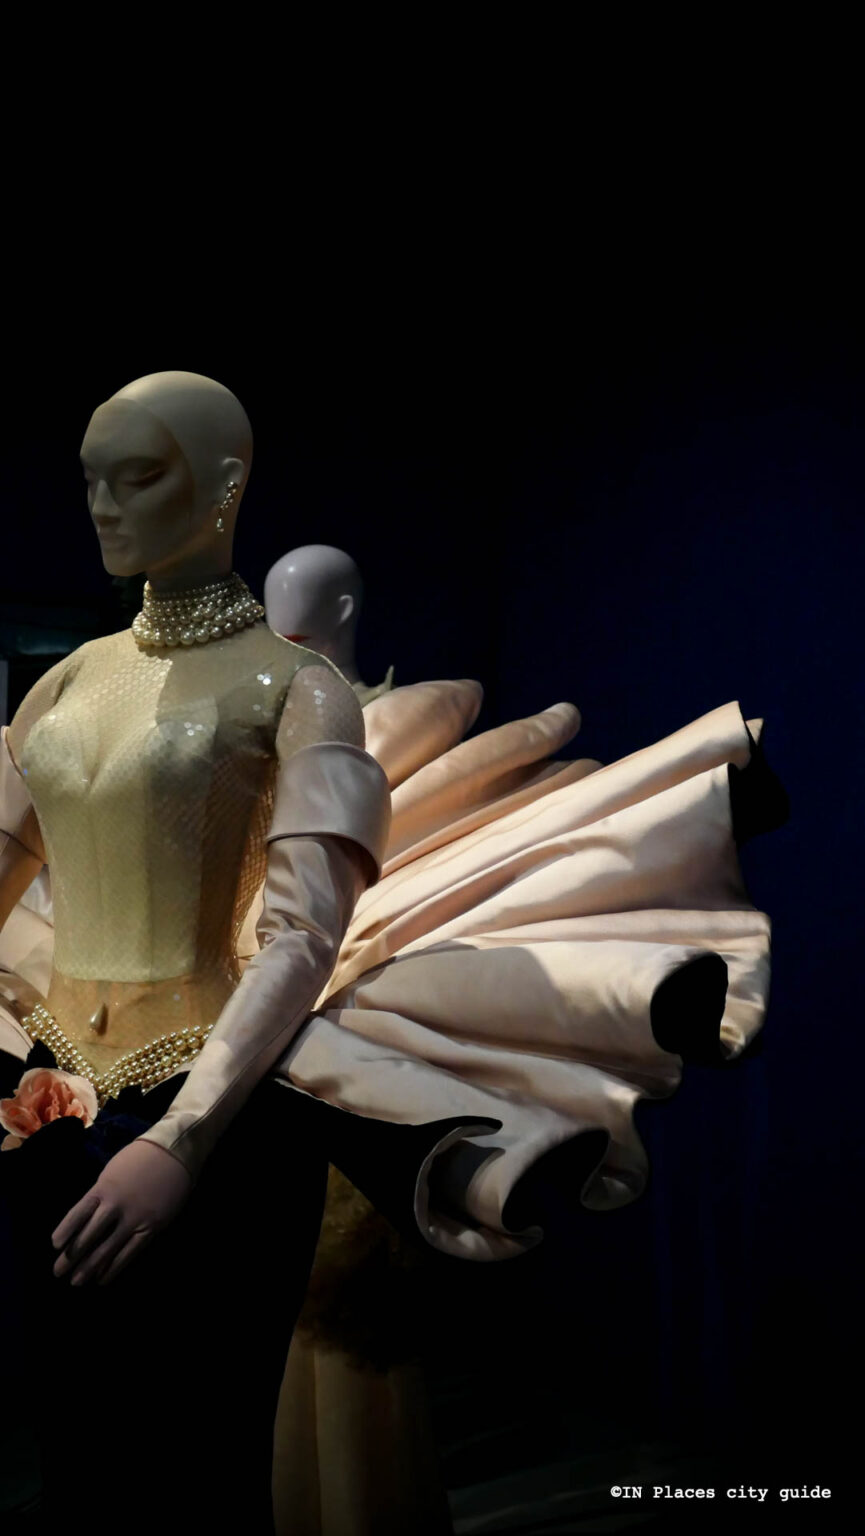 Thierry Mugler. Couturissime. MAD Paris 2021-2022 | IN Places city guide